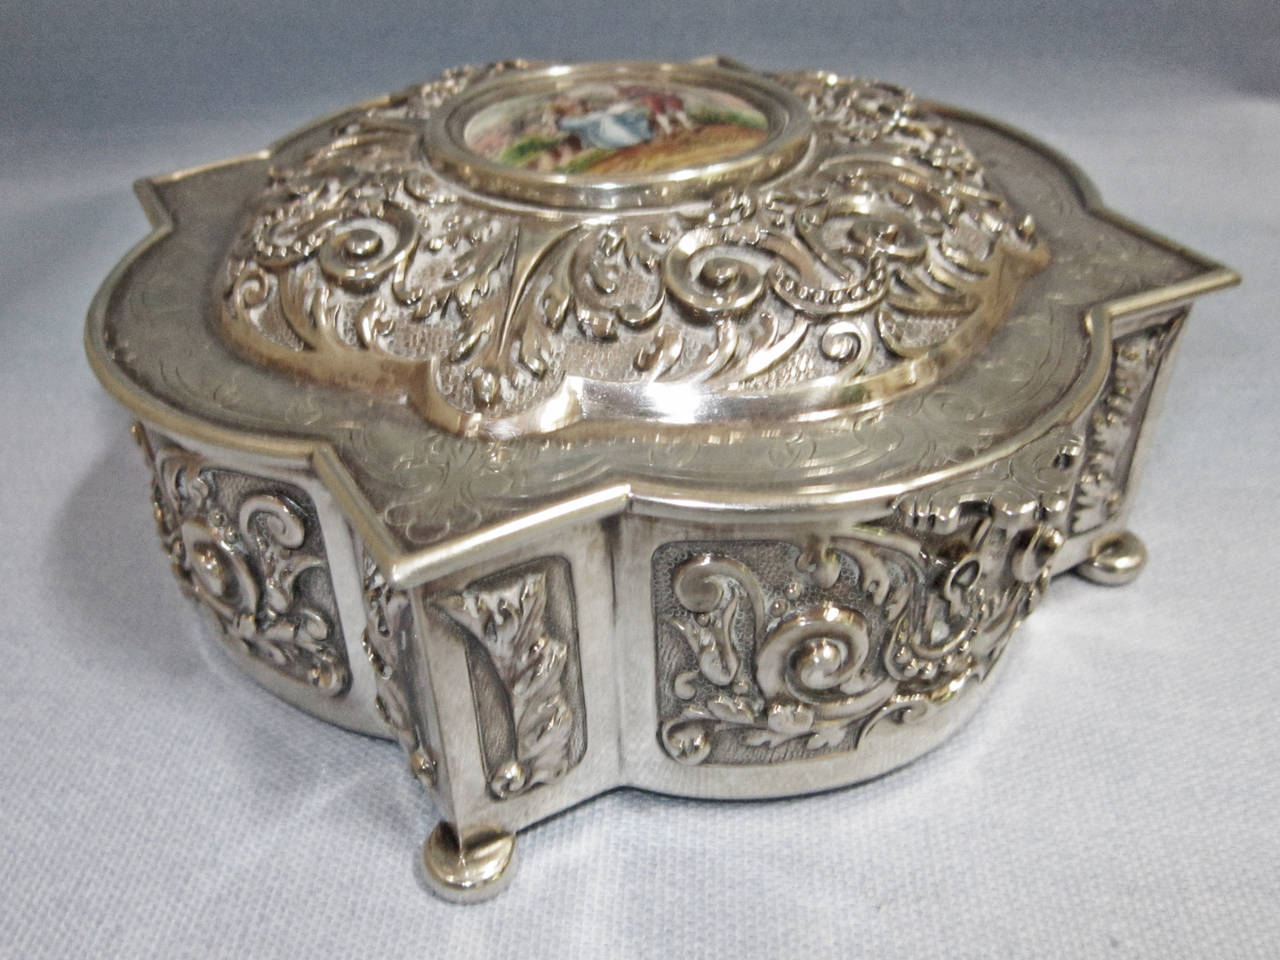 This lovely jewel box is made of 83% silver and is so marked.  The porcelain inlay is a transfer design with a few brush strokes of real painting.  
Lovely vintage piece with a nice patina to the silver.  No key comes with it so we do not know if